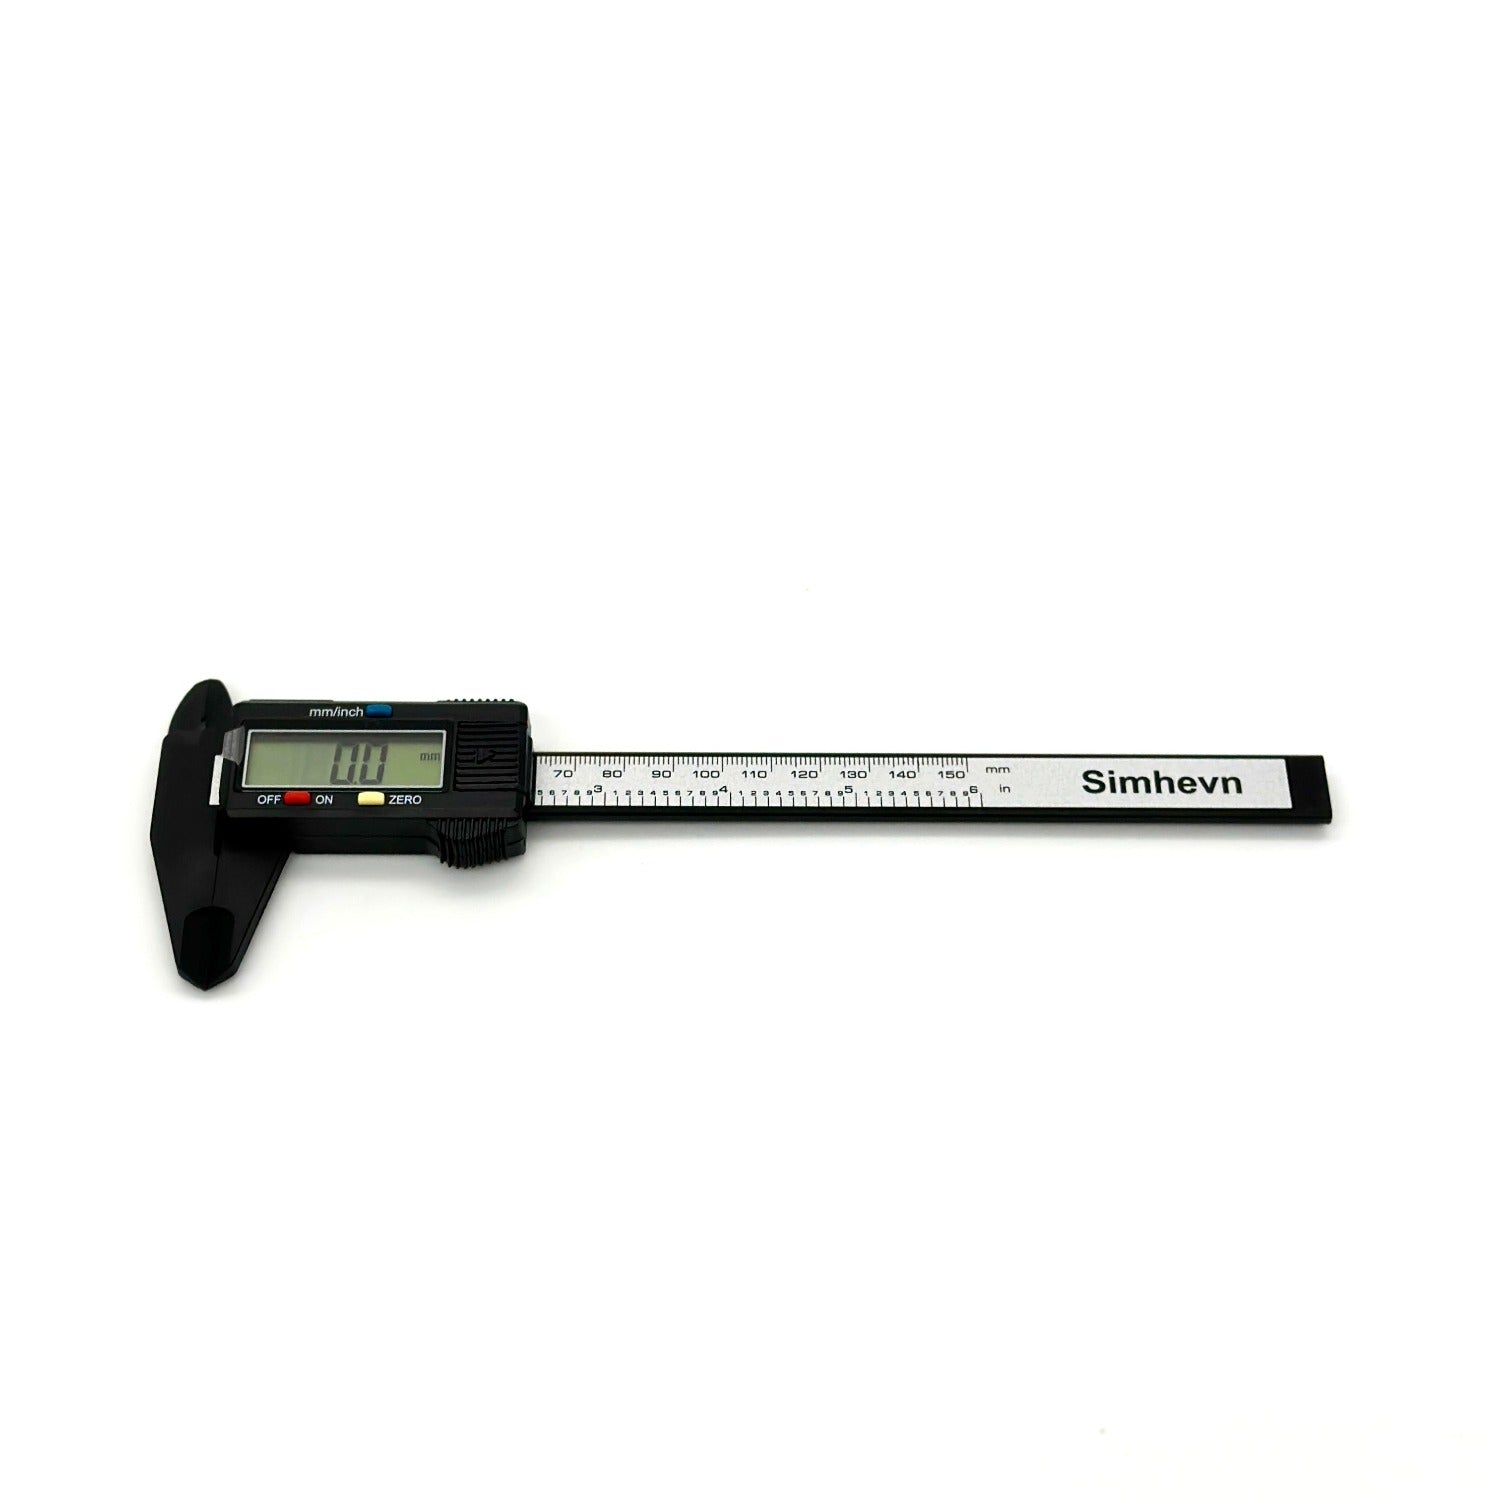 Electronic Digital Caliper- Accurately Measure Hardware & Parts!